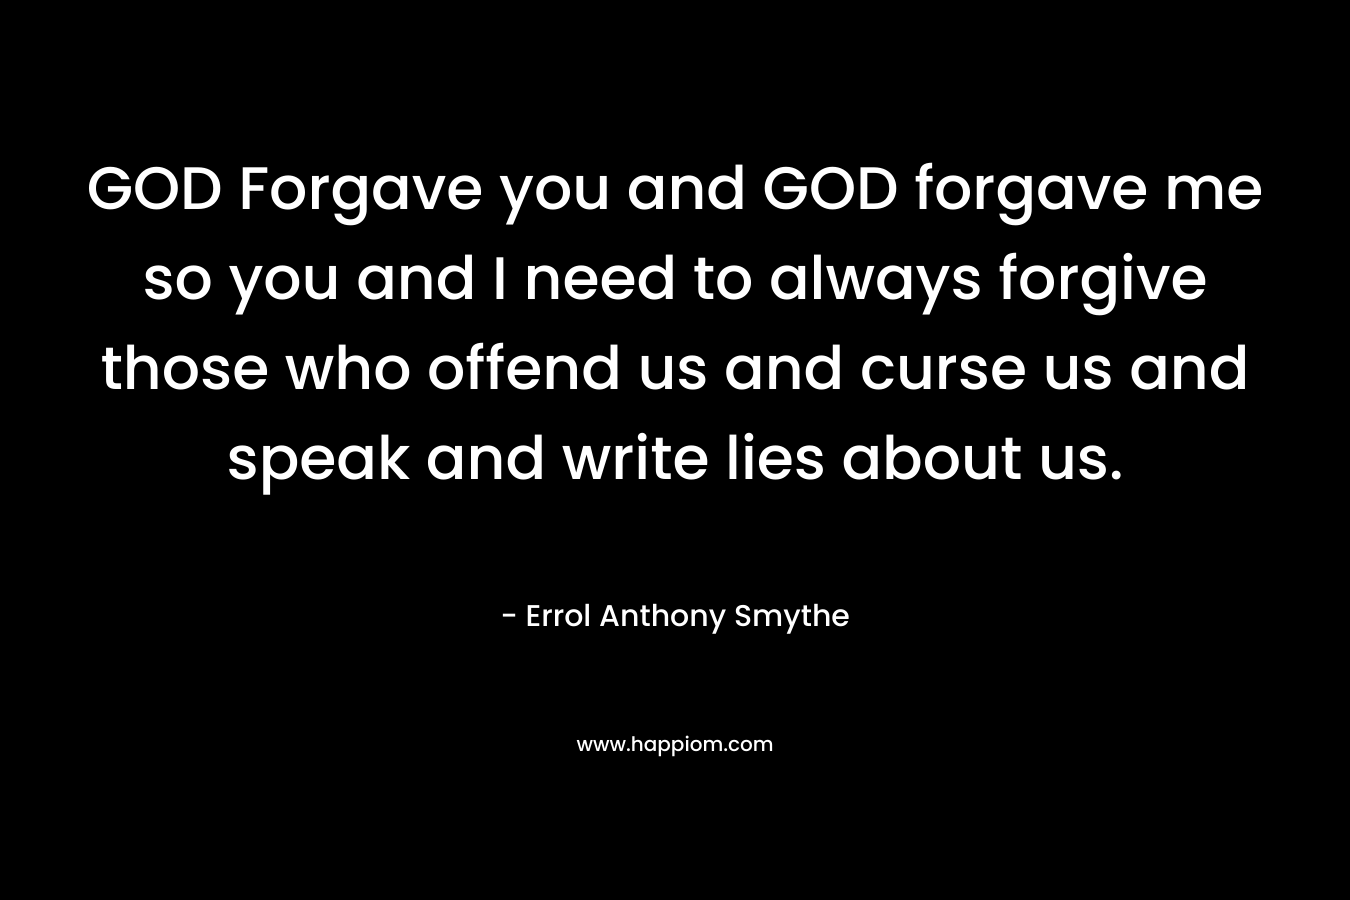 GOD Forgave you and GOD forgave me so you and I need to always forgive those who offend us and curse us and speak and write lies about us. – Errol Anthony Smythe